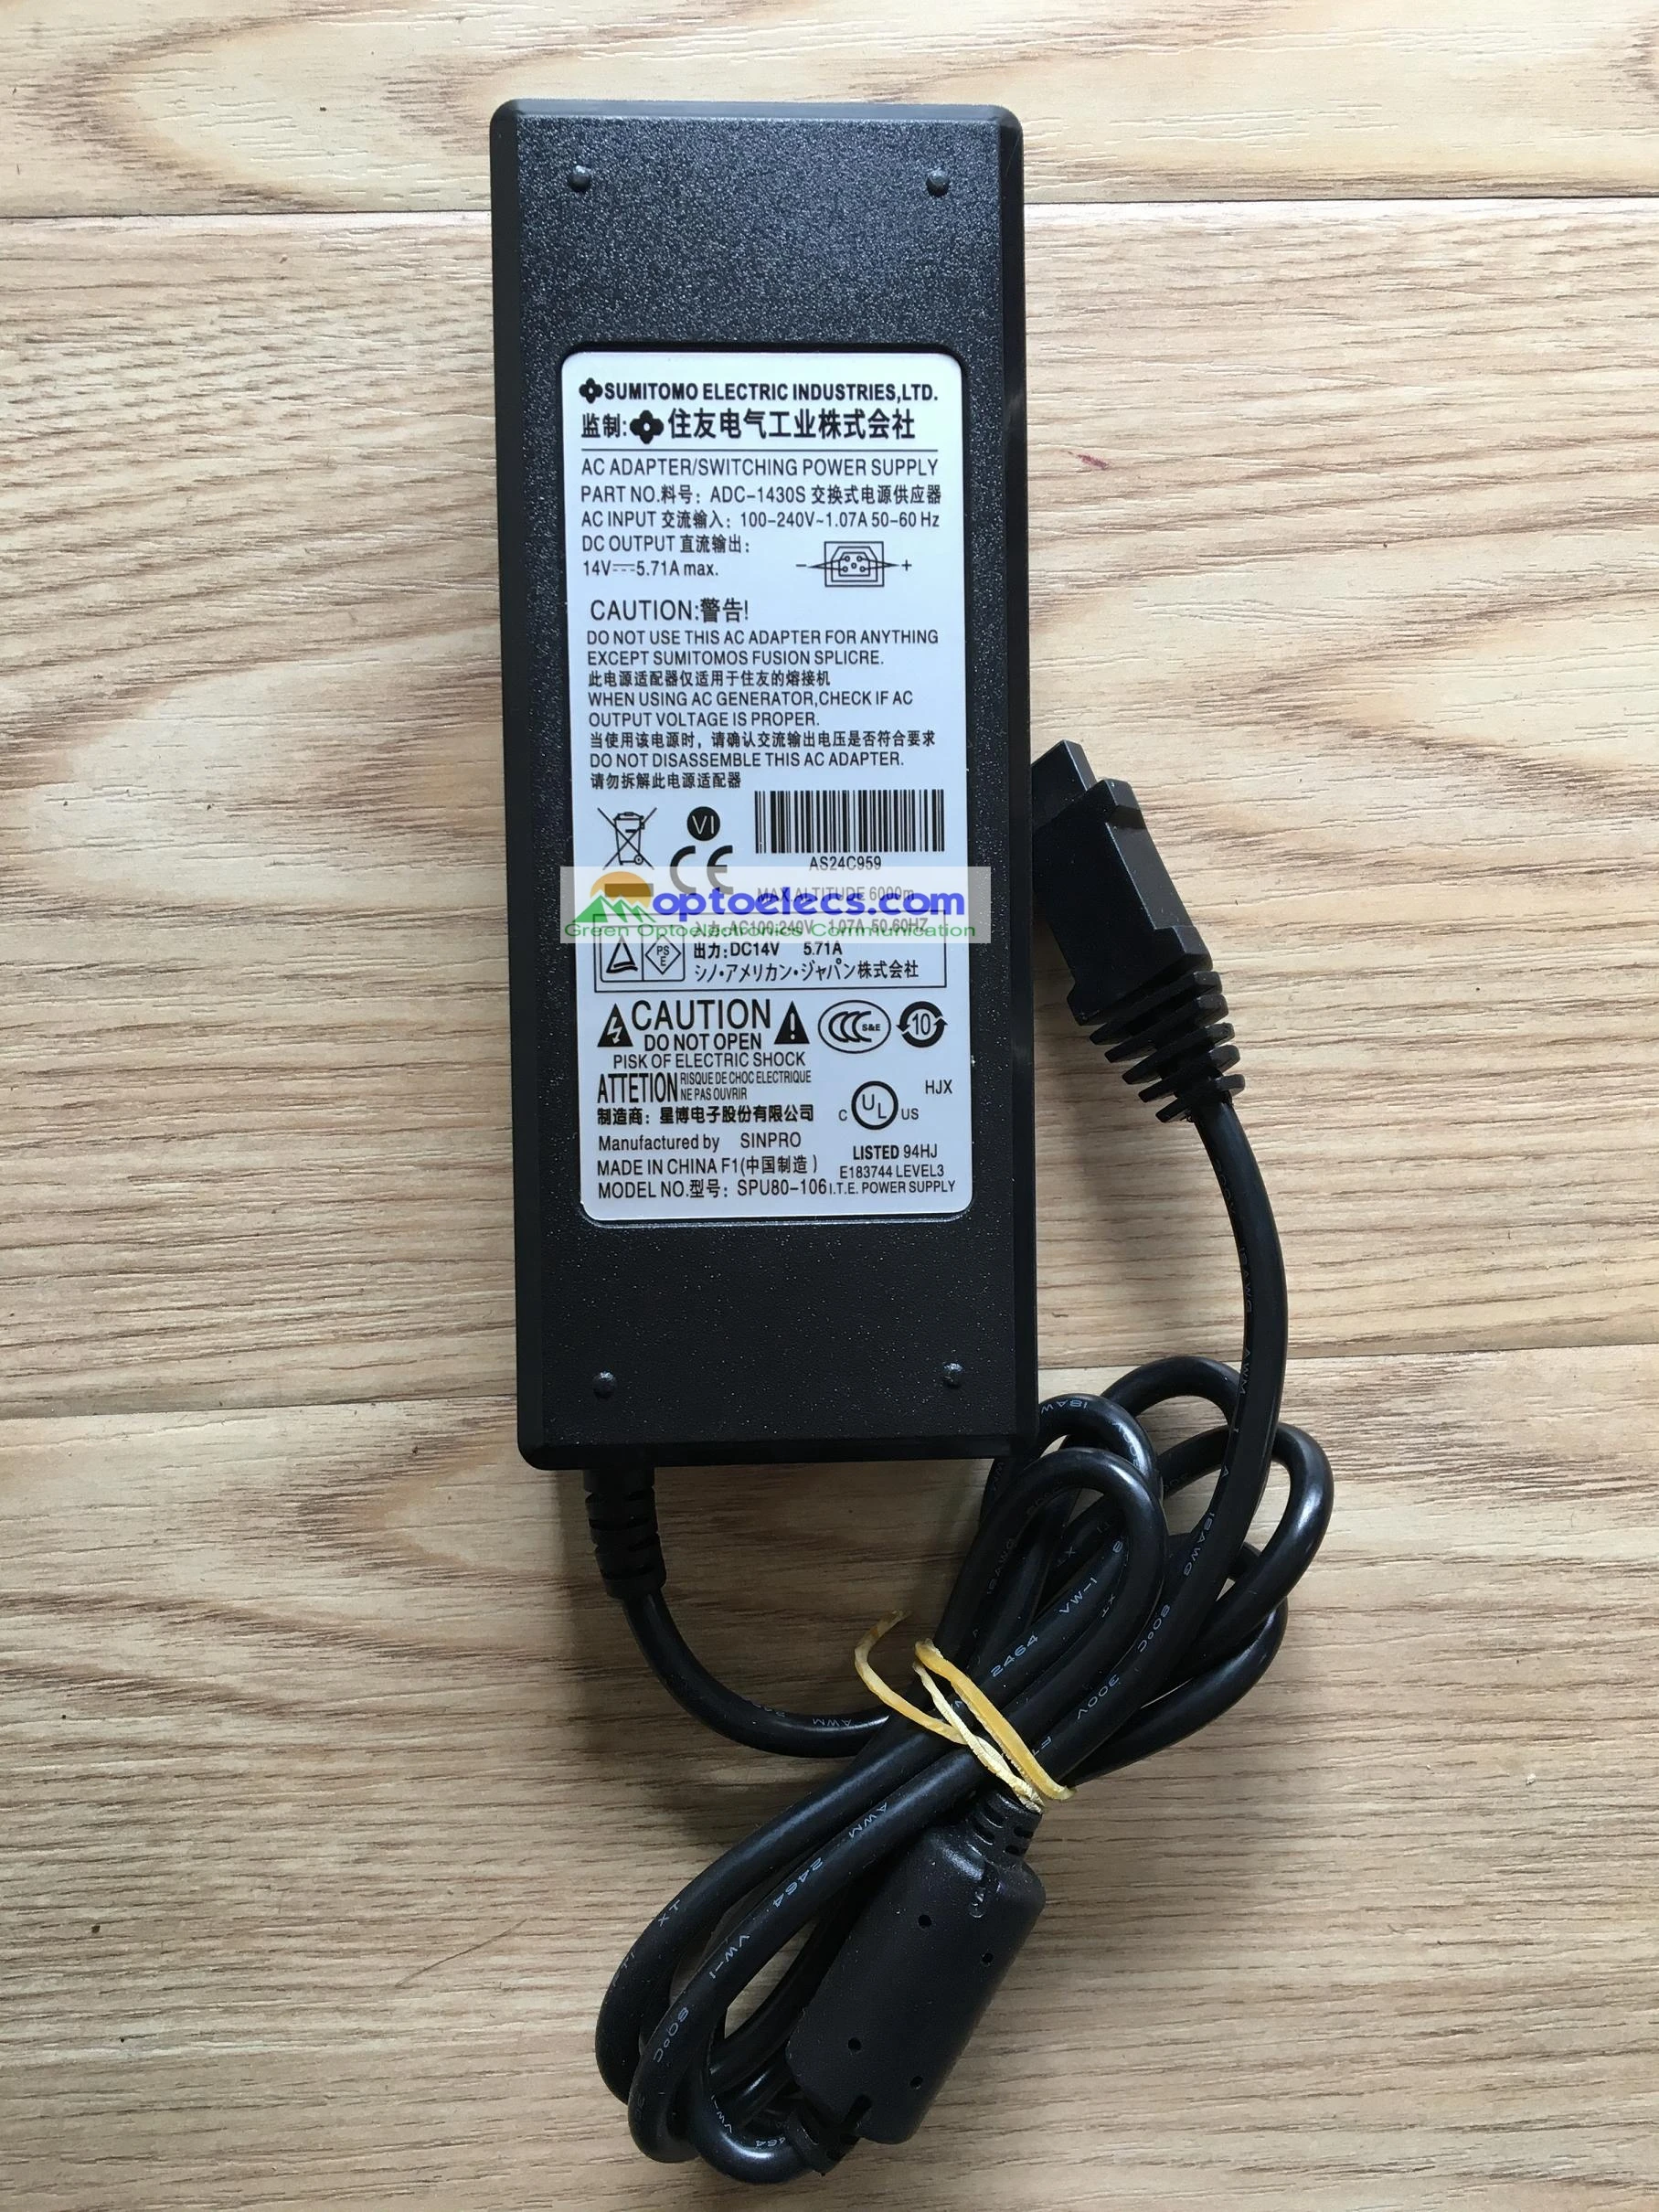 ADC-1430s/14V/5.71A Optical Fiber Fusion Splicer Power AC Adapter charger 